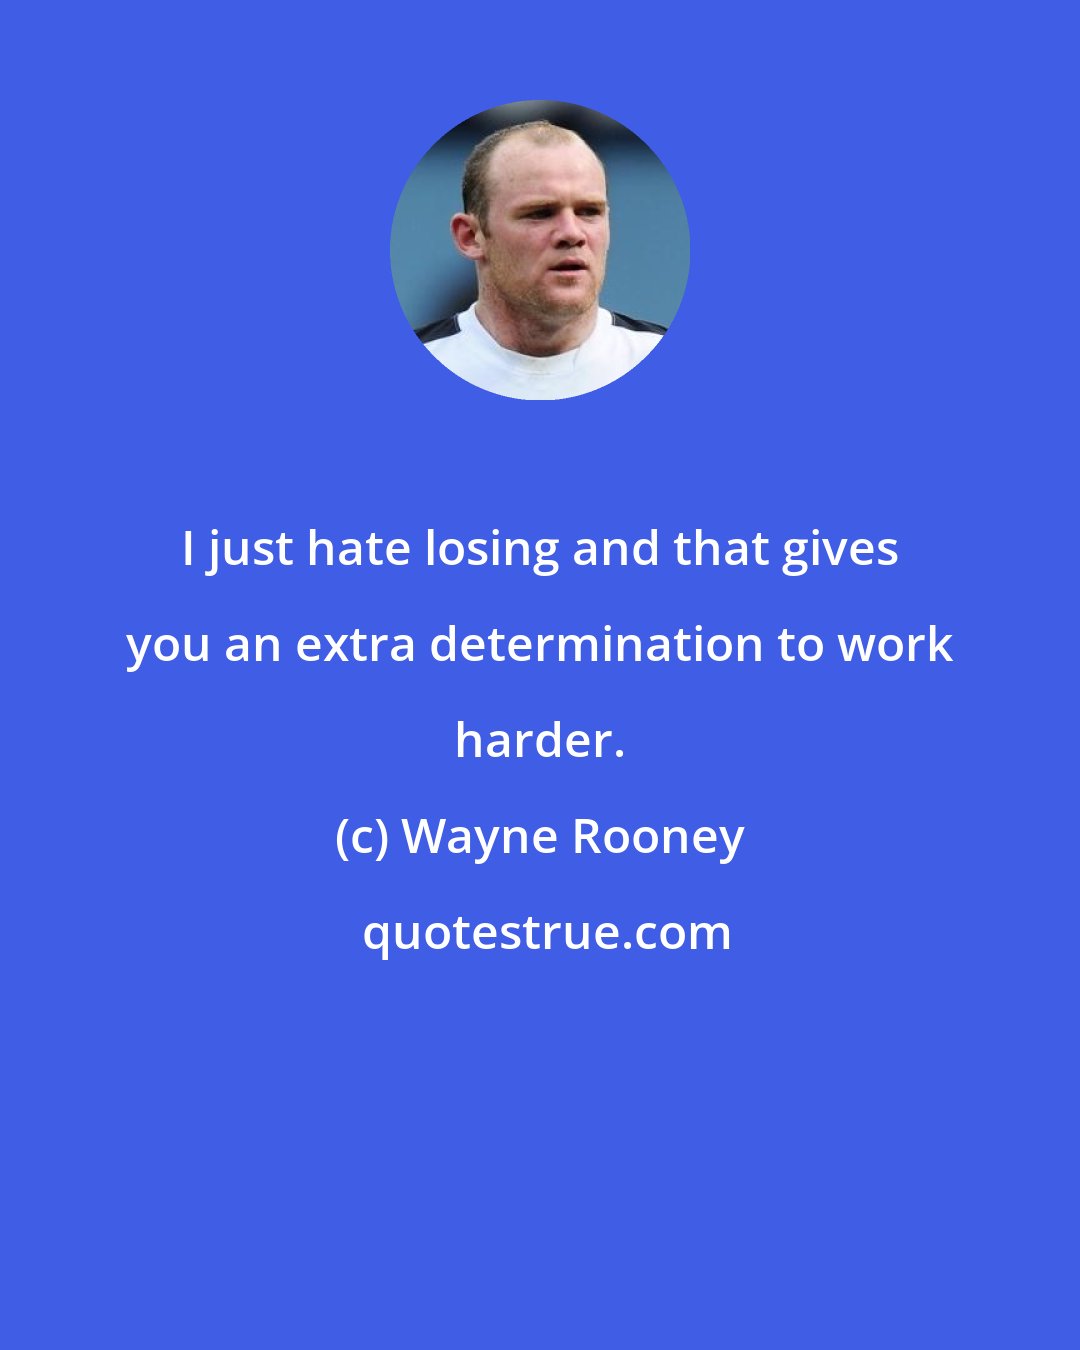 Wayne Rooney: I just hate losing and that gives you an extra determination to work harder.